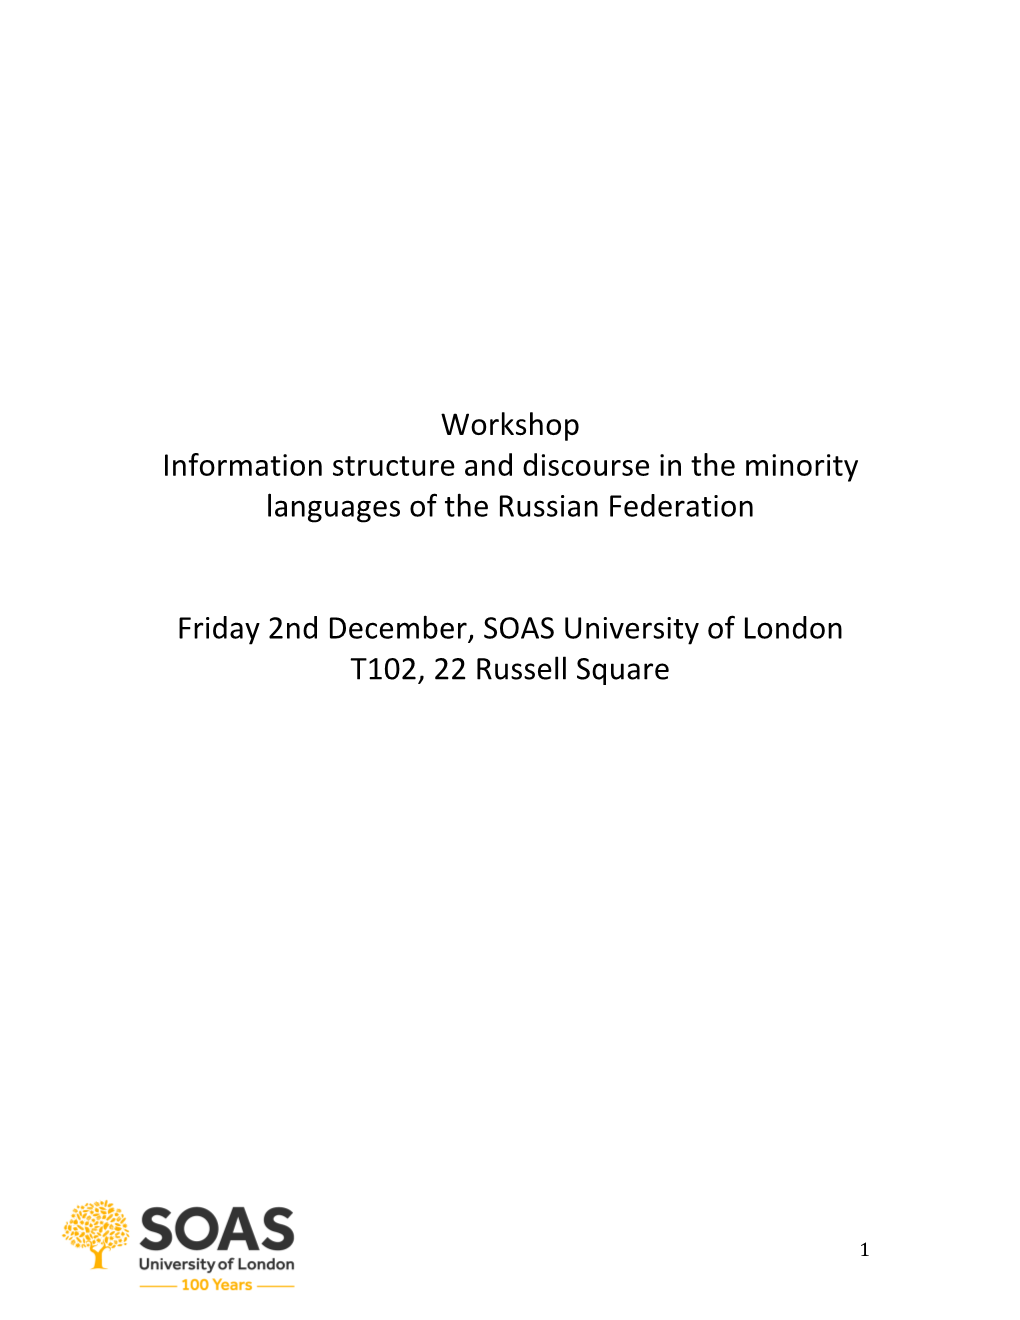 Workshop Information Structure and Discourse in the Minority Languages of the Russian Federation